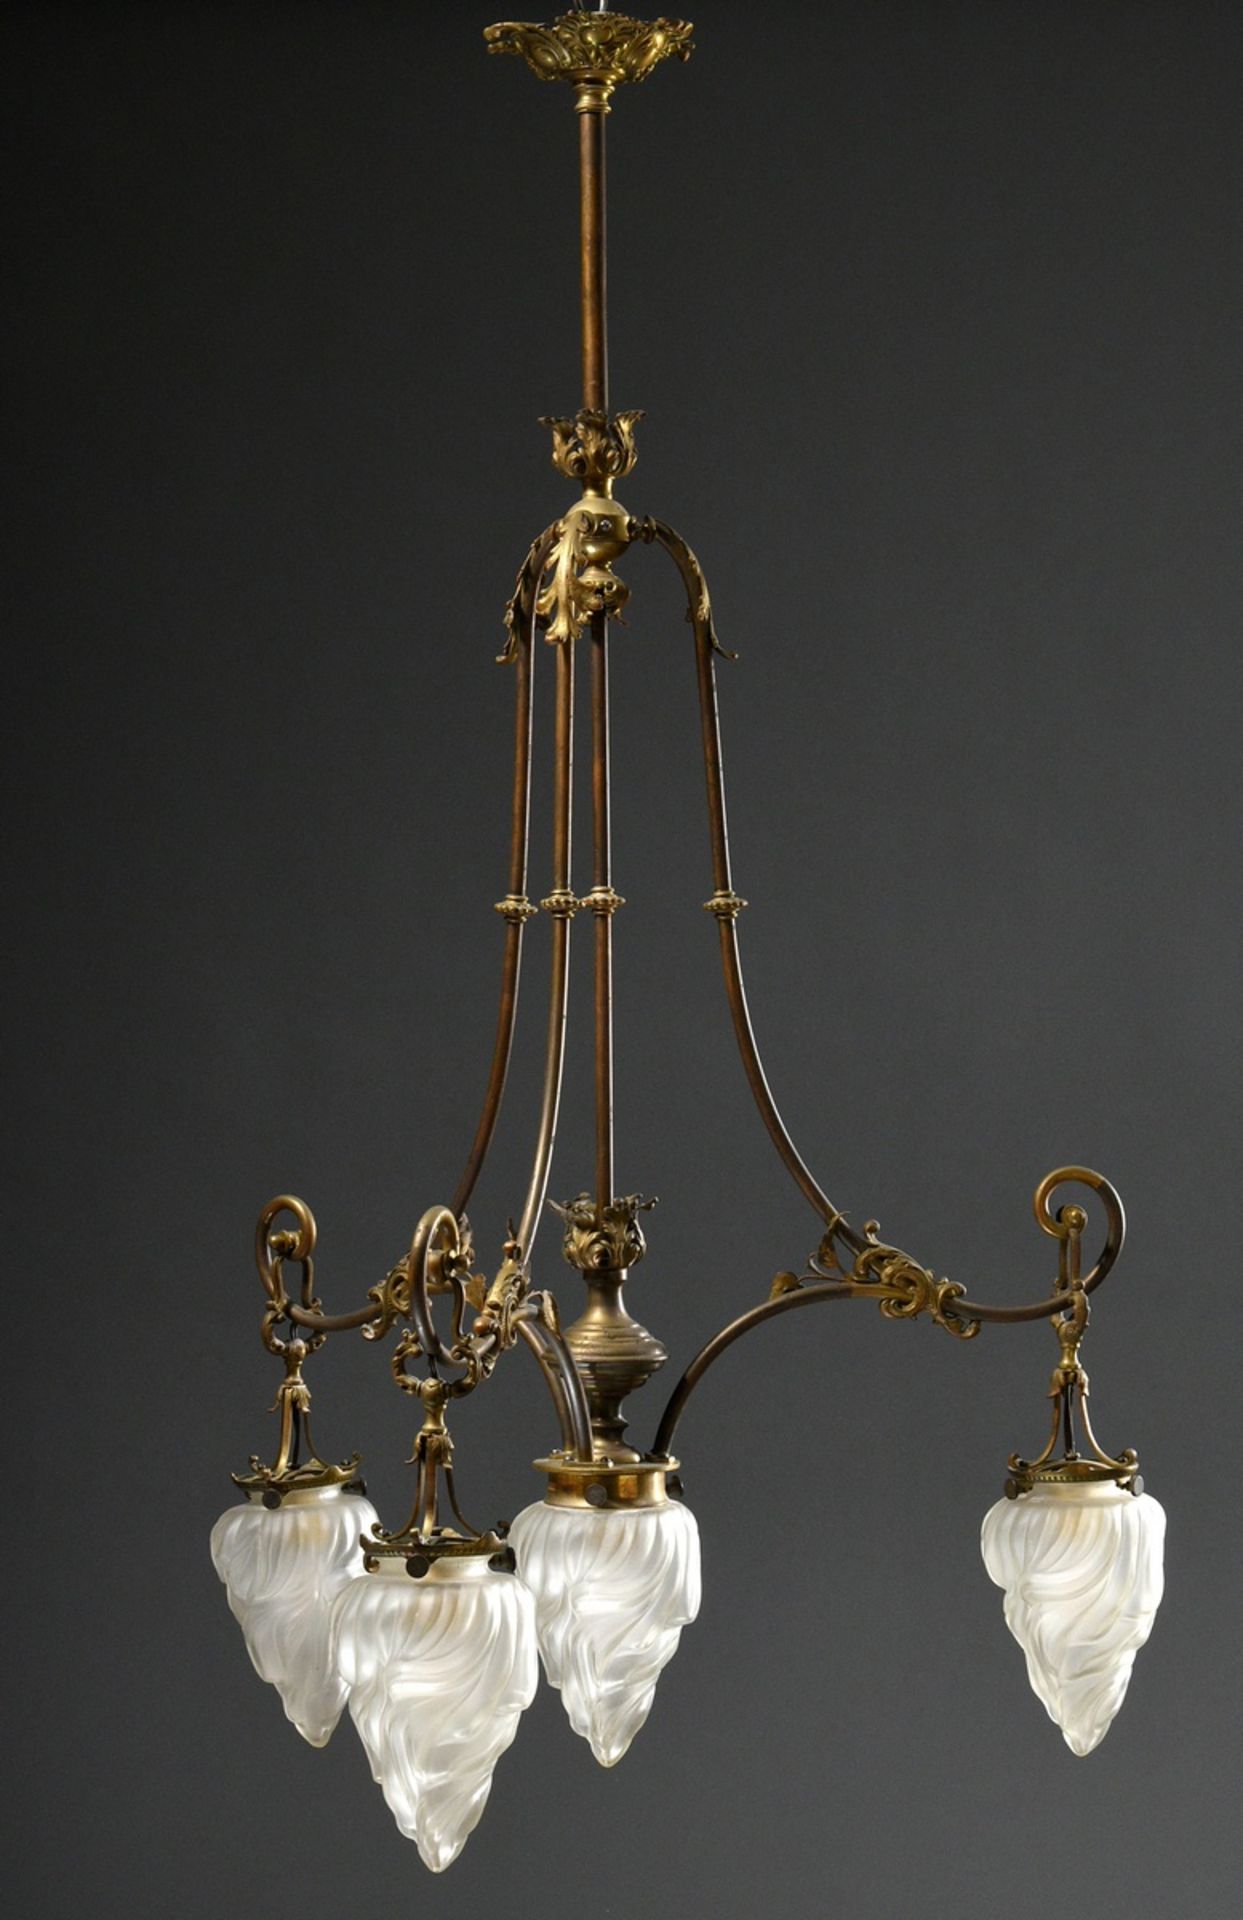 Wilhelminian period ceiling lamp with 4 frosted "flames" glass domes on brass frame with floral dec